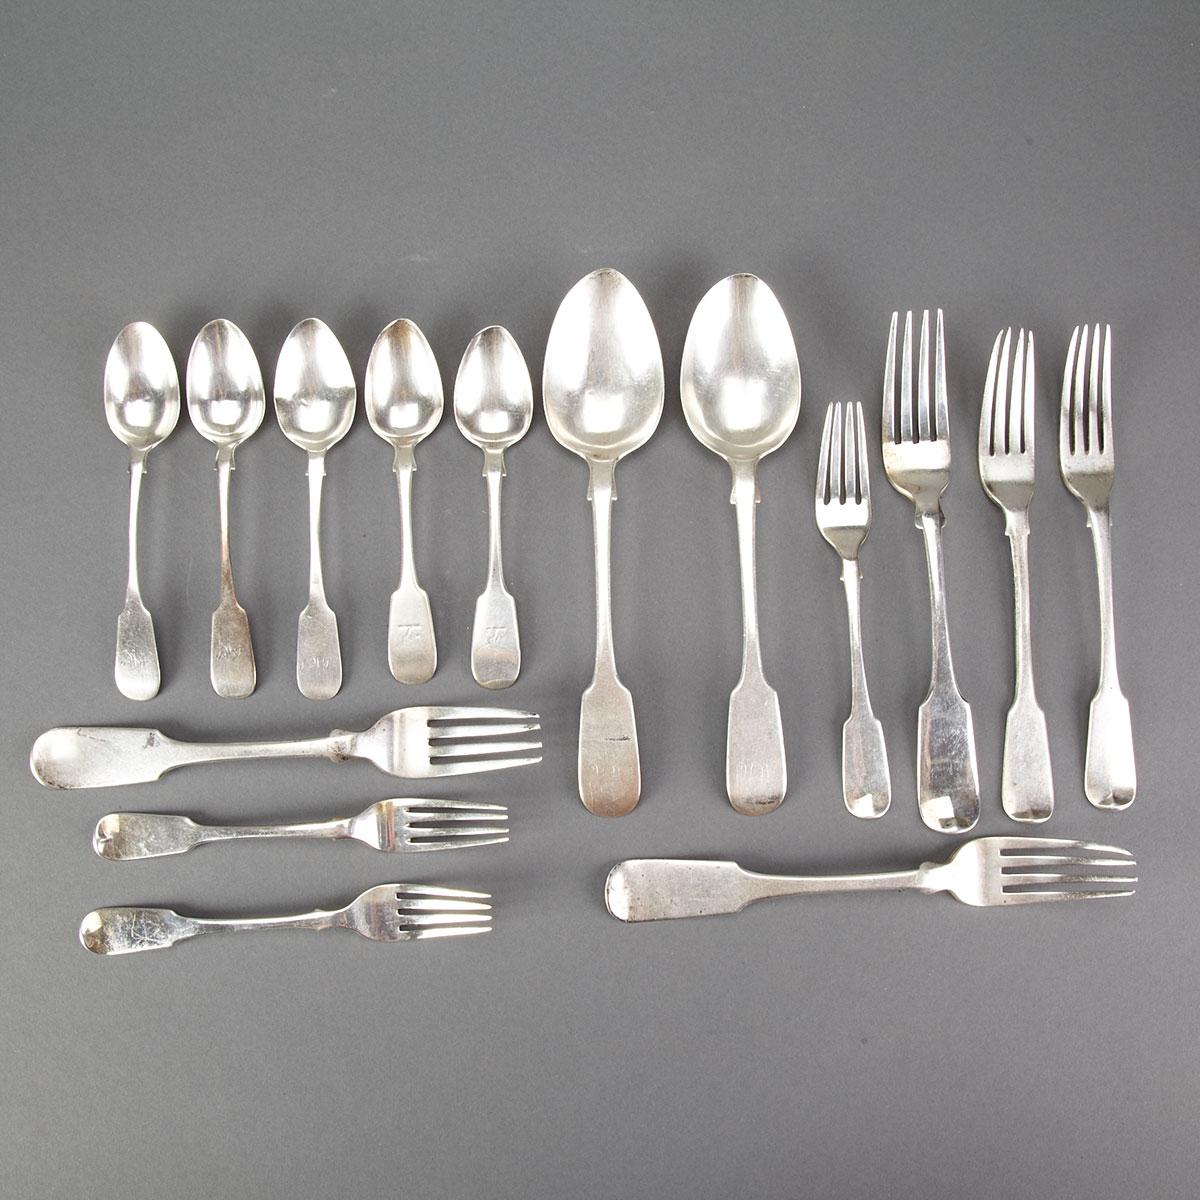 Group of Canadian Silver Fiddle Pattern Flatware, Montreal and Ontario makers, 19th century